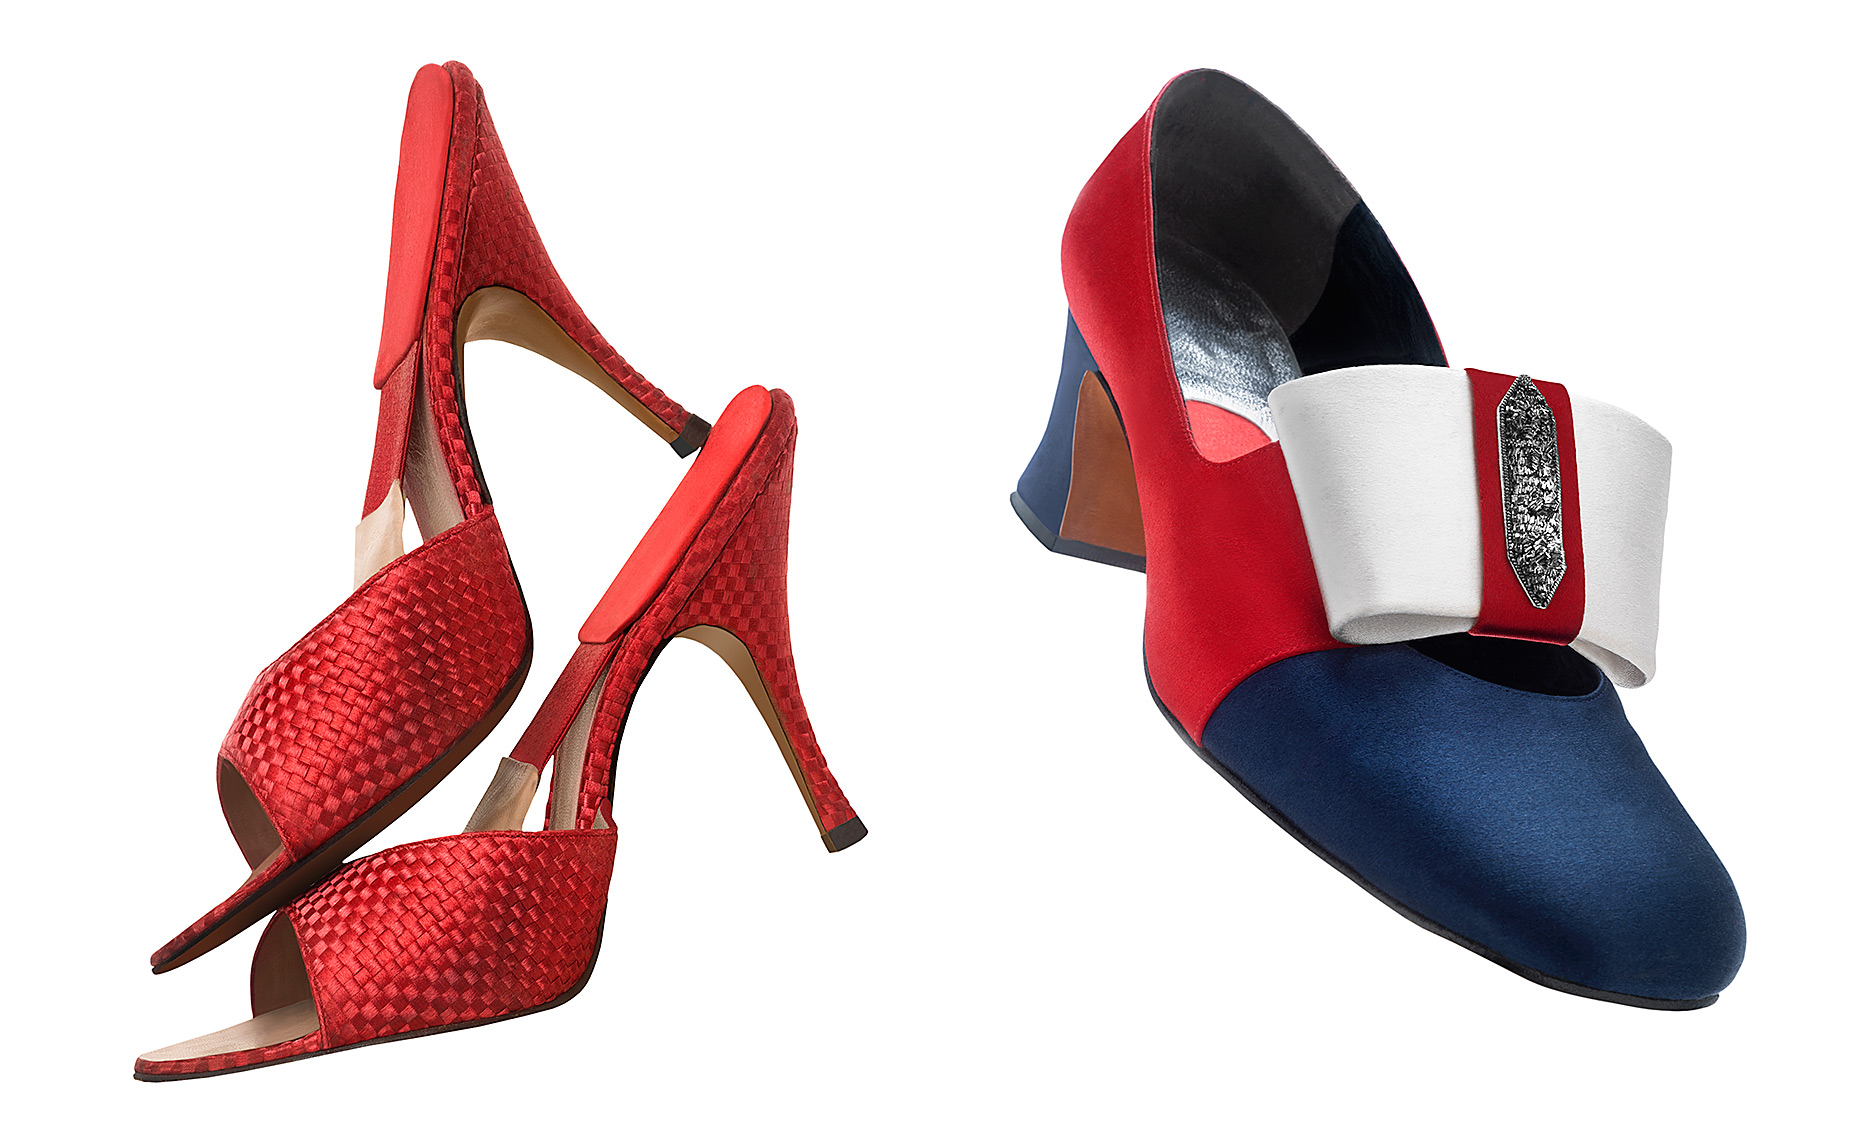 "Spring-o-laters" red satin mules and red, white and blue satin pump by Beth Levine